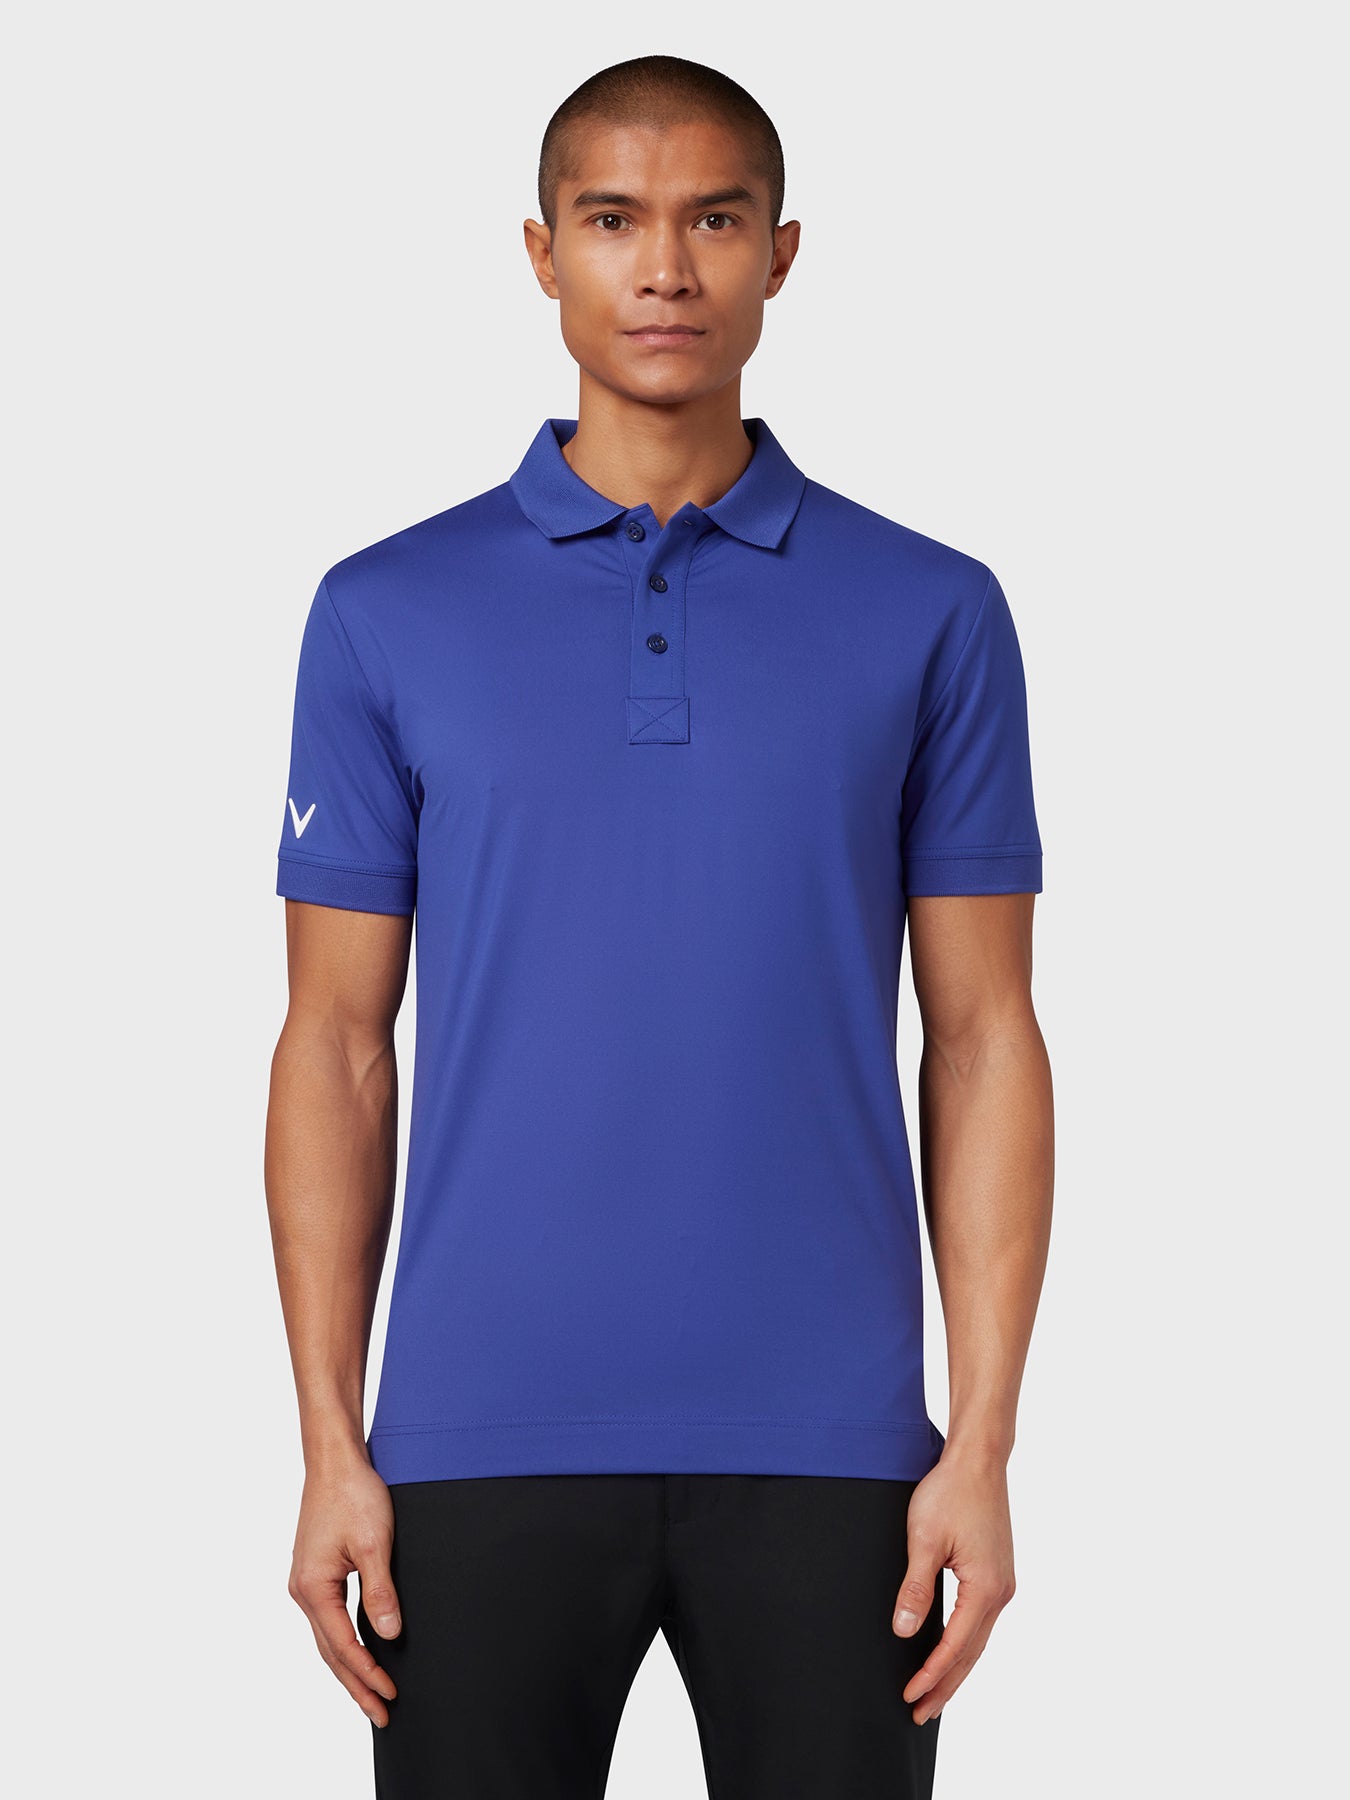 View X Series Solid Ribbed Polo In Clematis Blue Clematis Blue XXL information